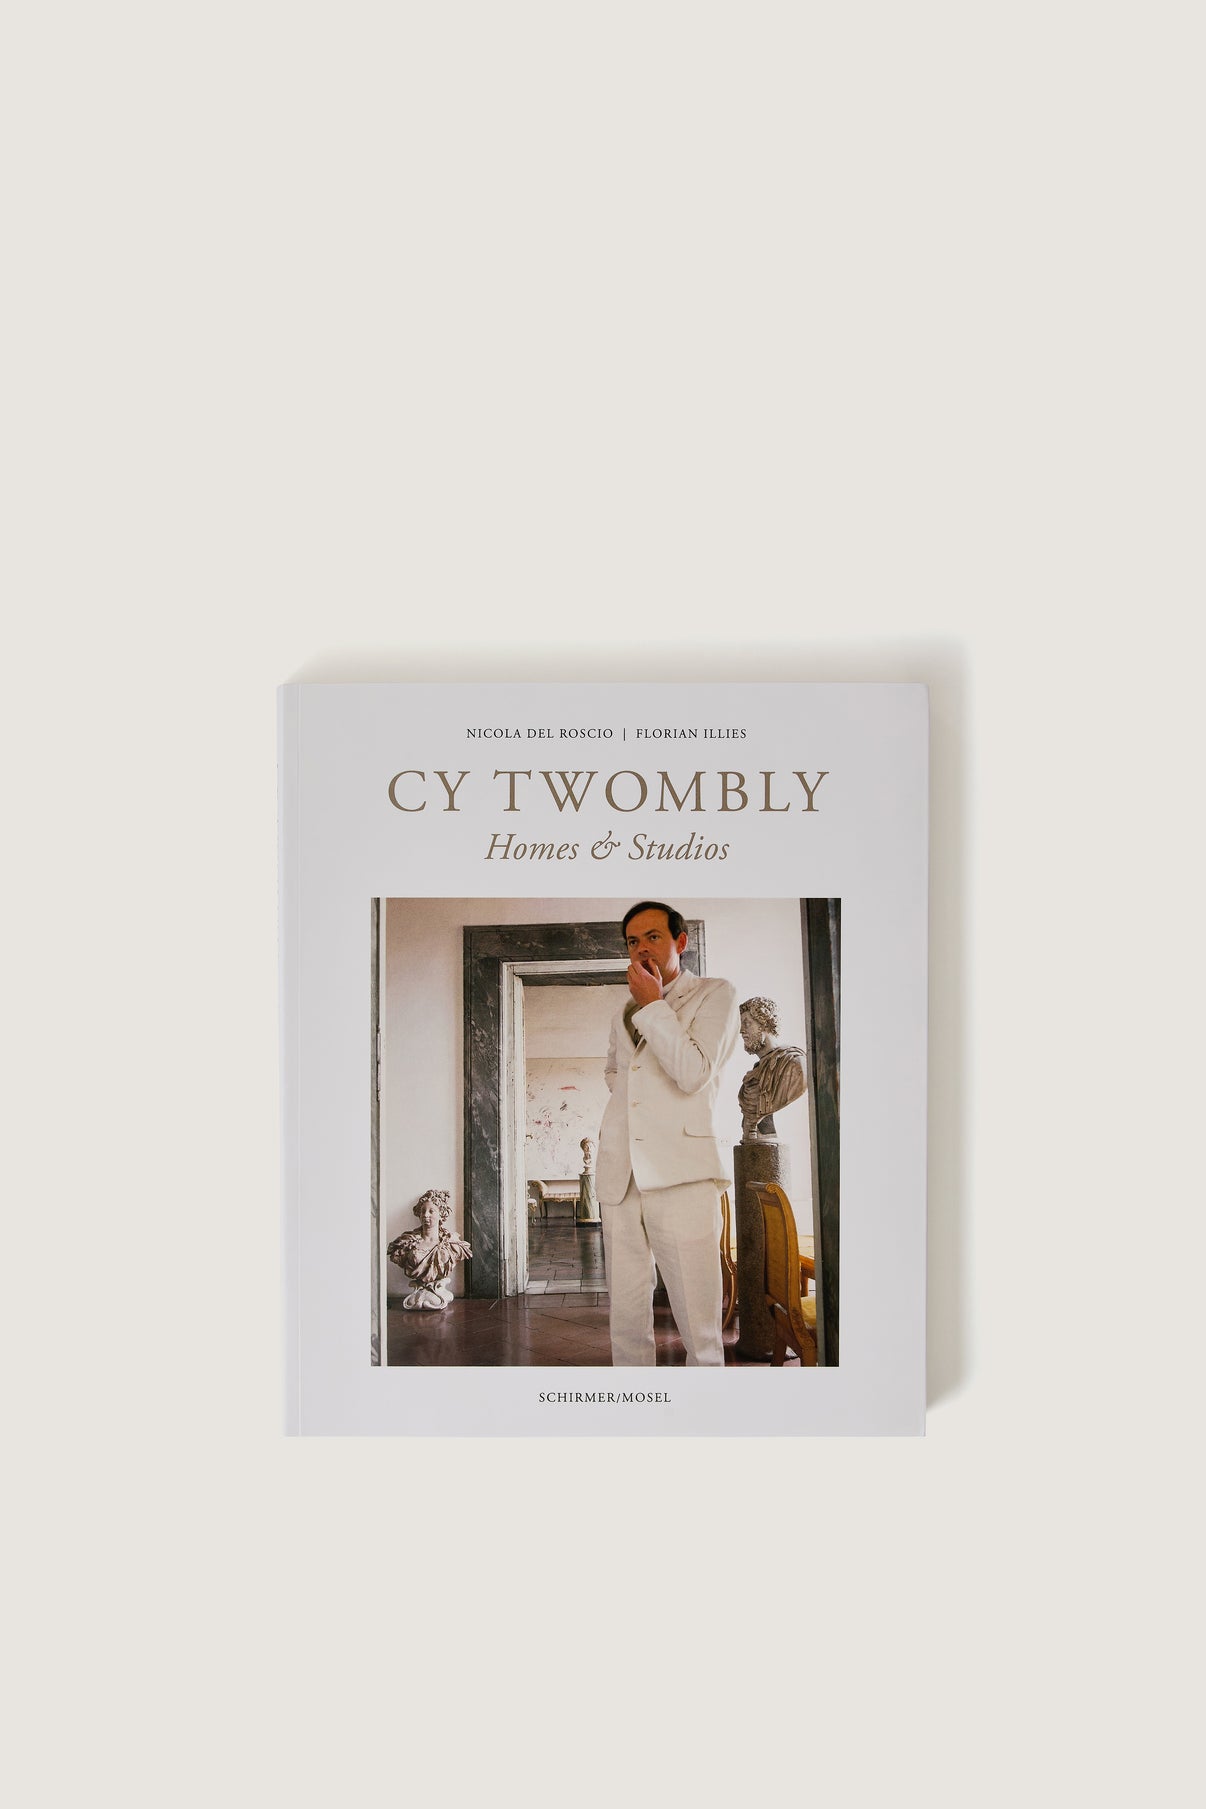 LIVRE "CY TWOMBLY, HOMES AND STUDIOS" vue 1